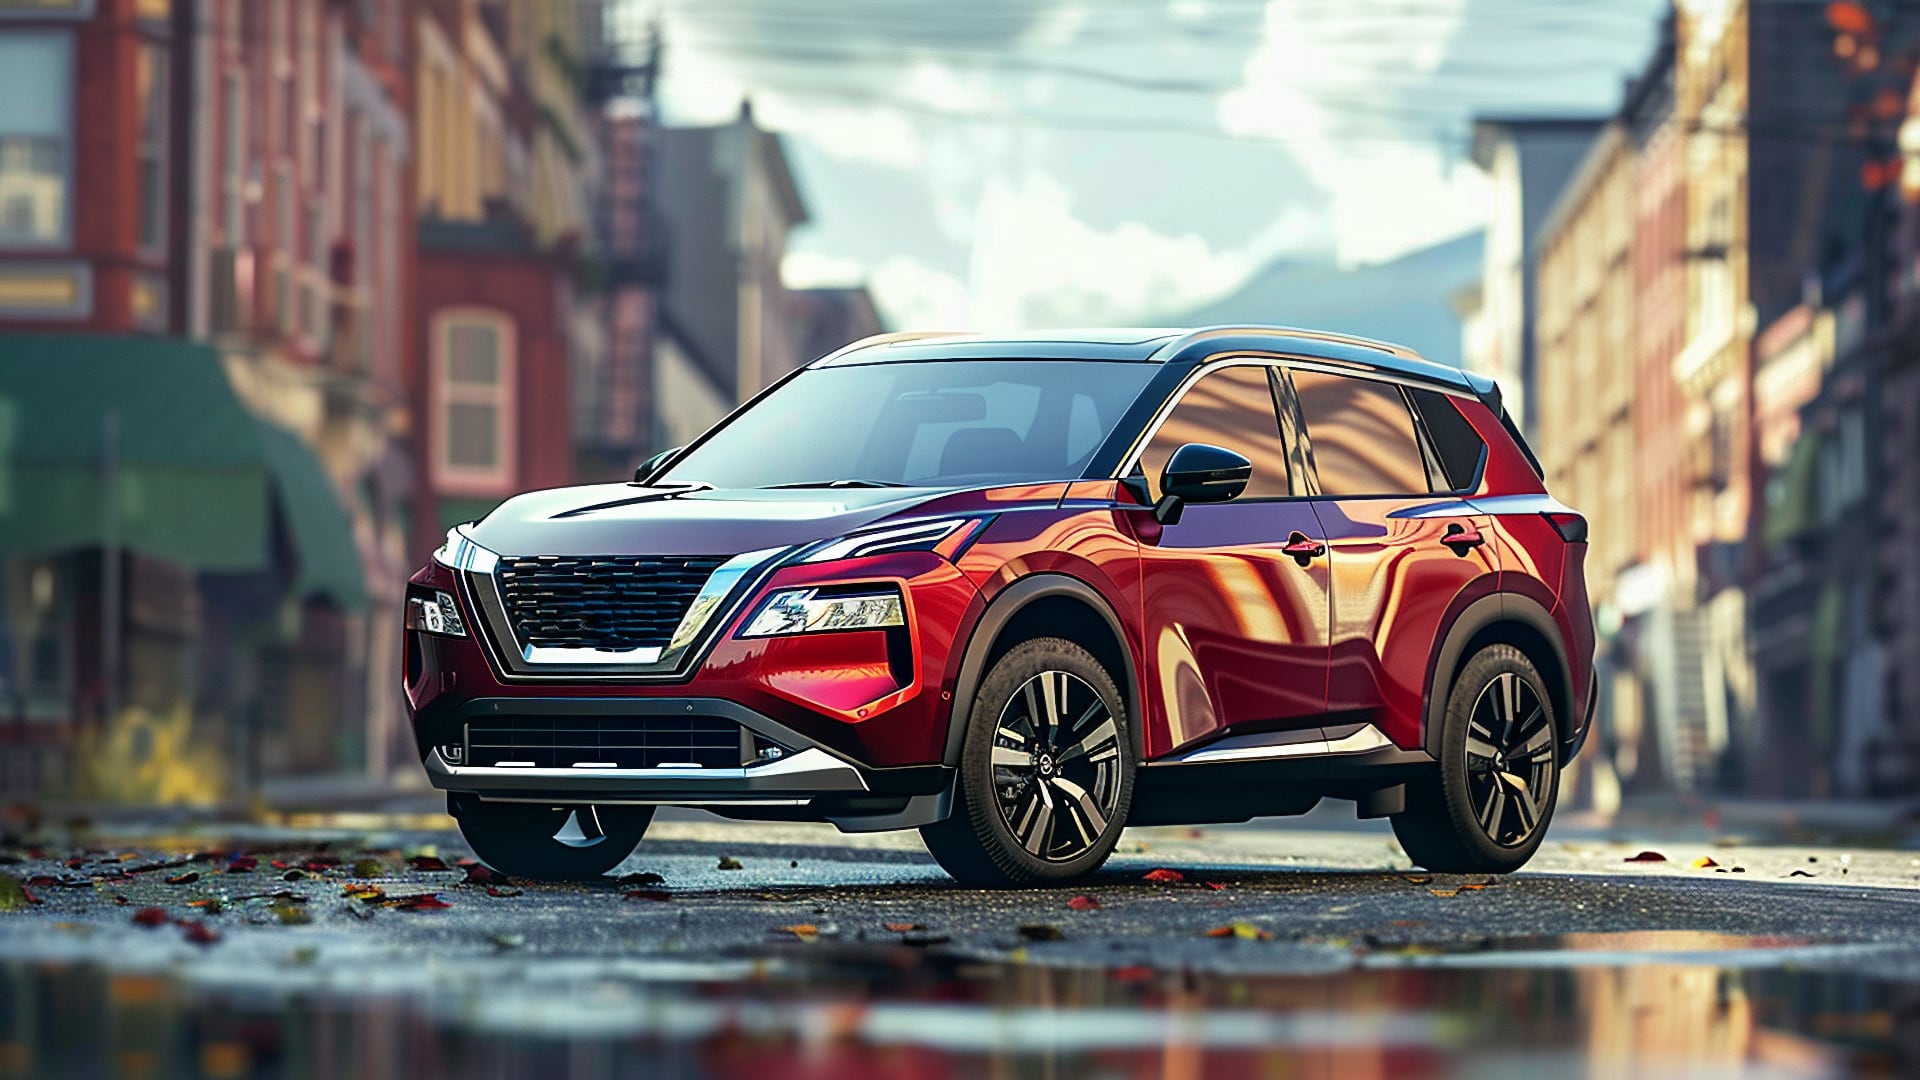 The 2020 Nissan Pathfinder is parked on a city street.